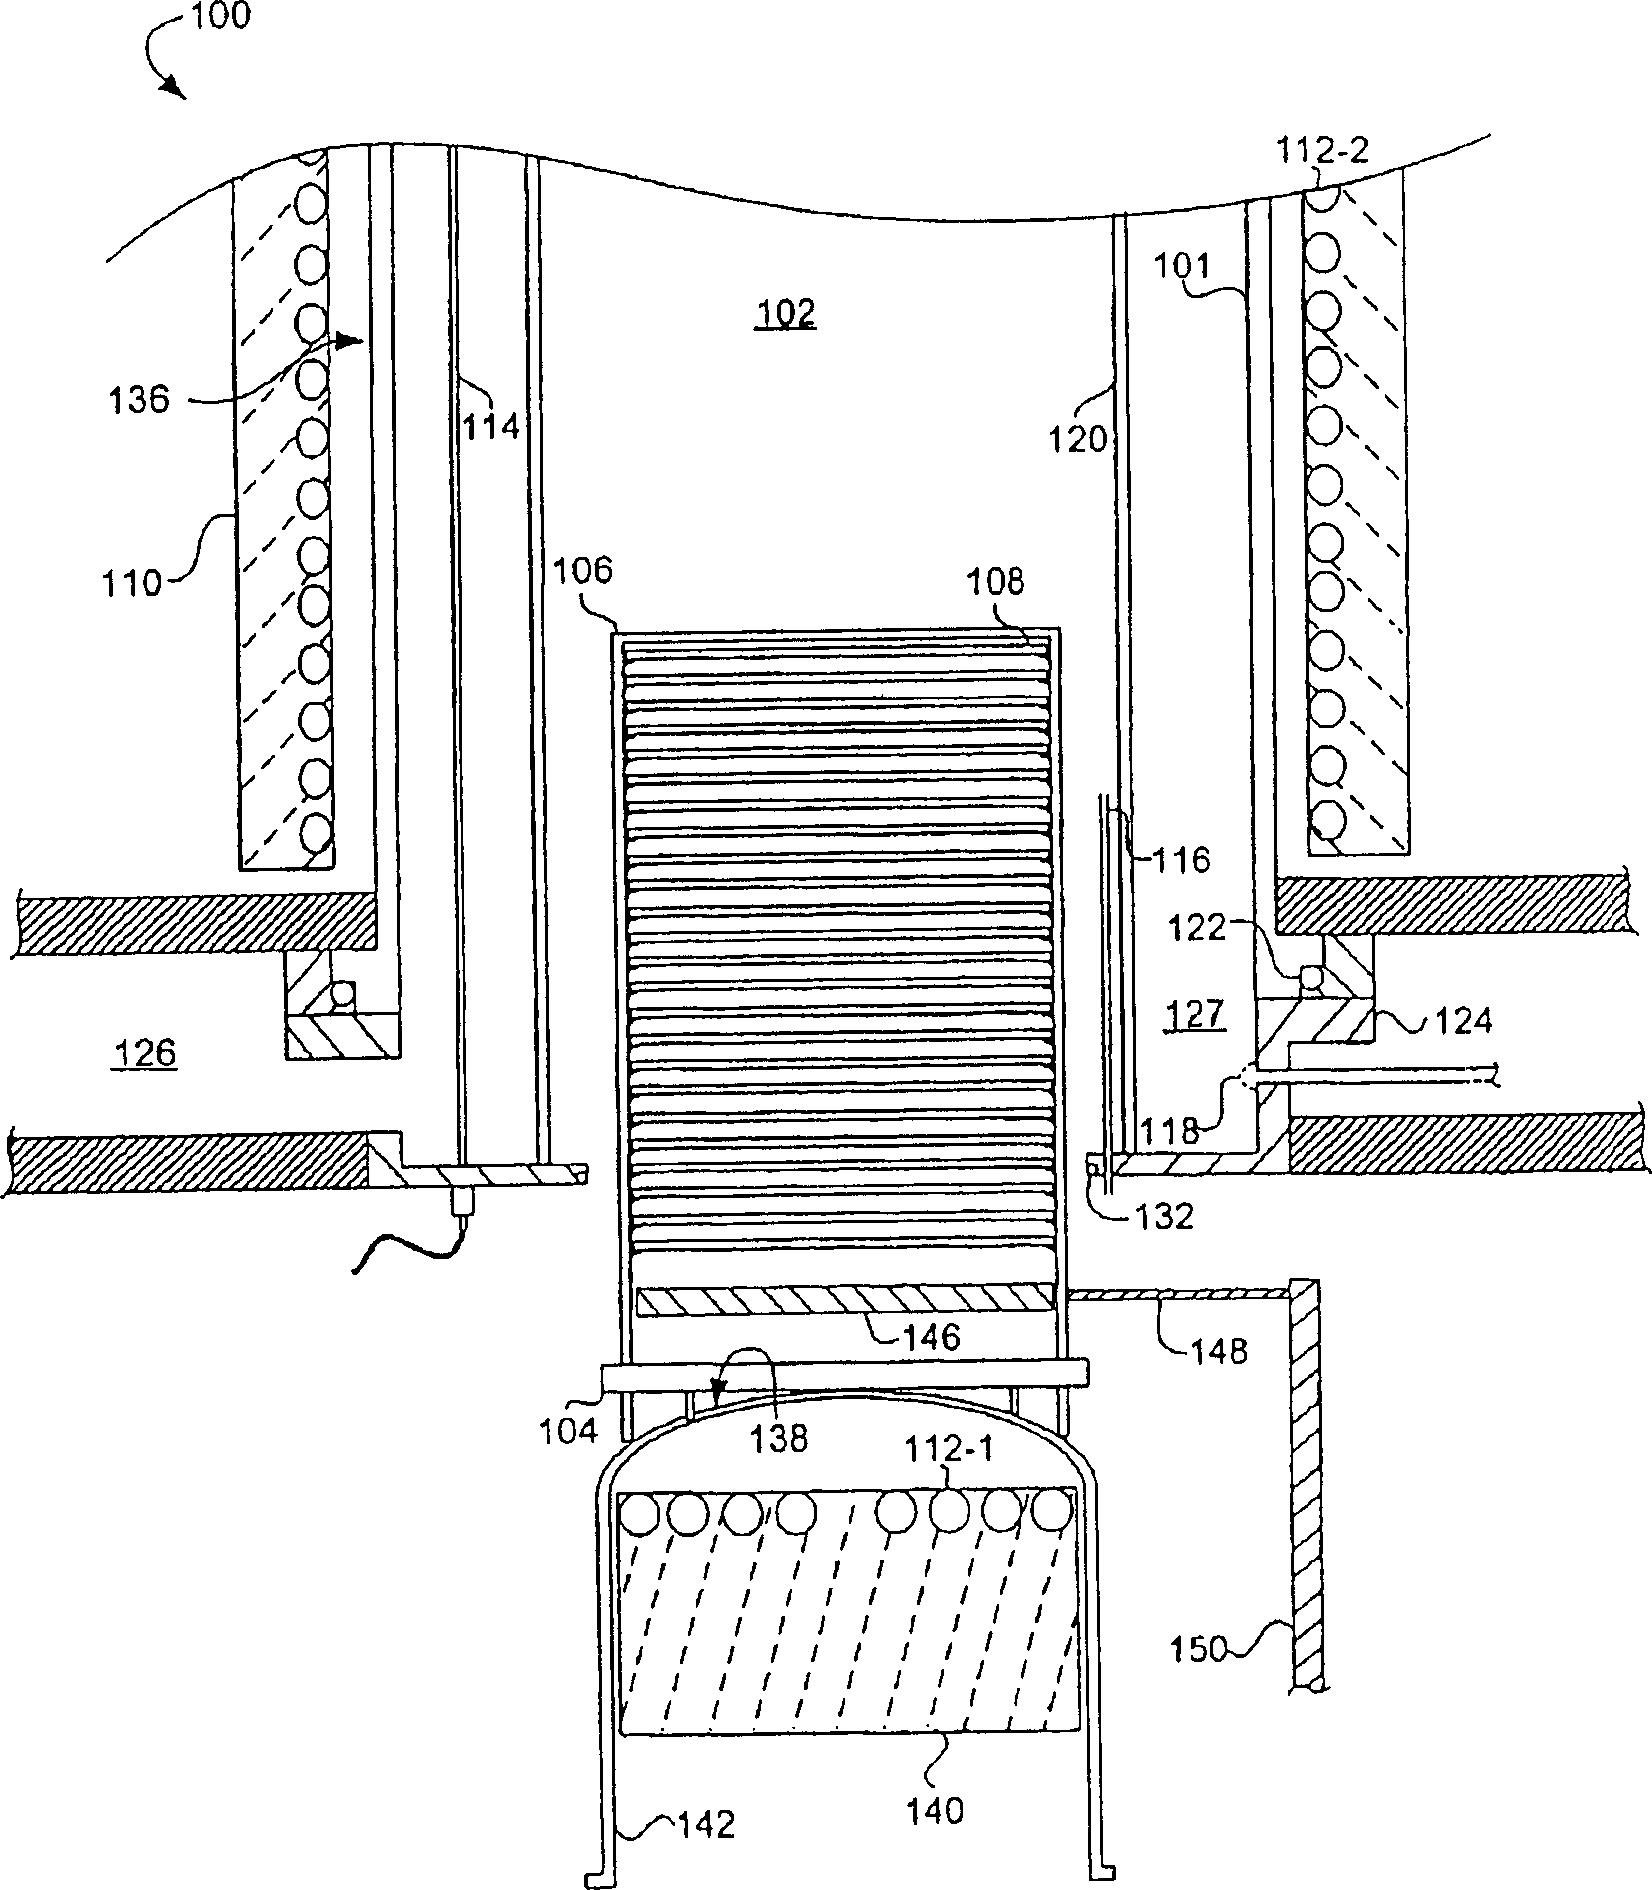 Heat treatment system and formable vertical chamber